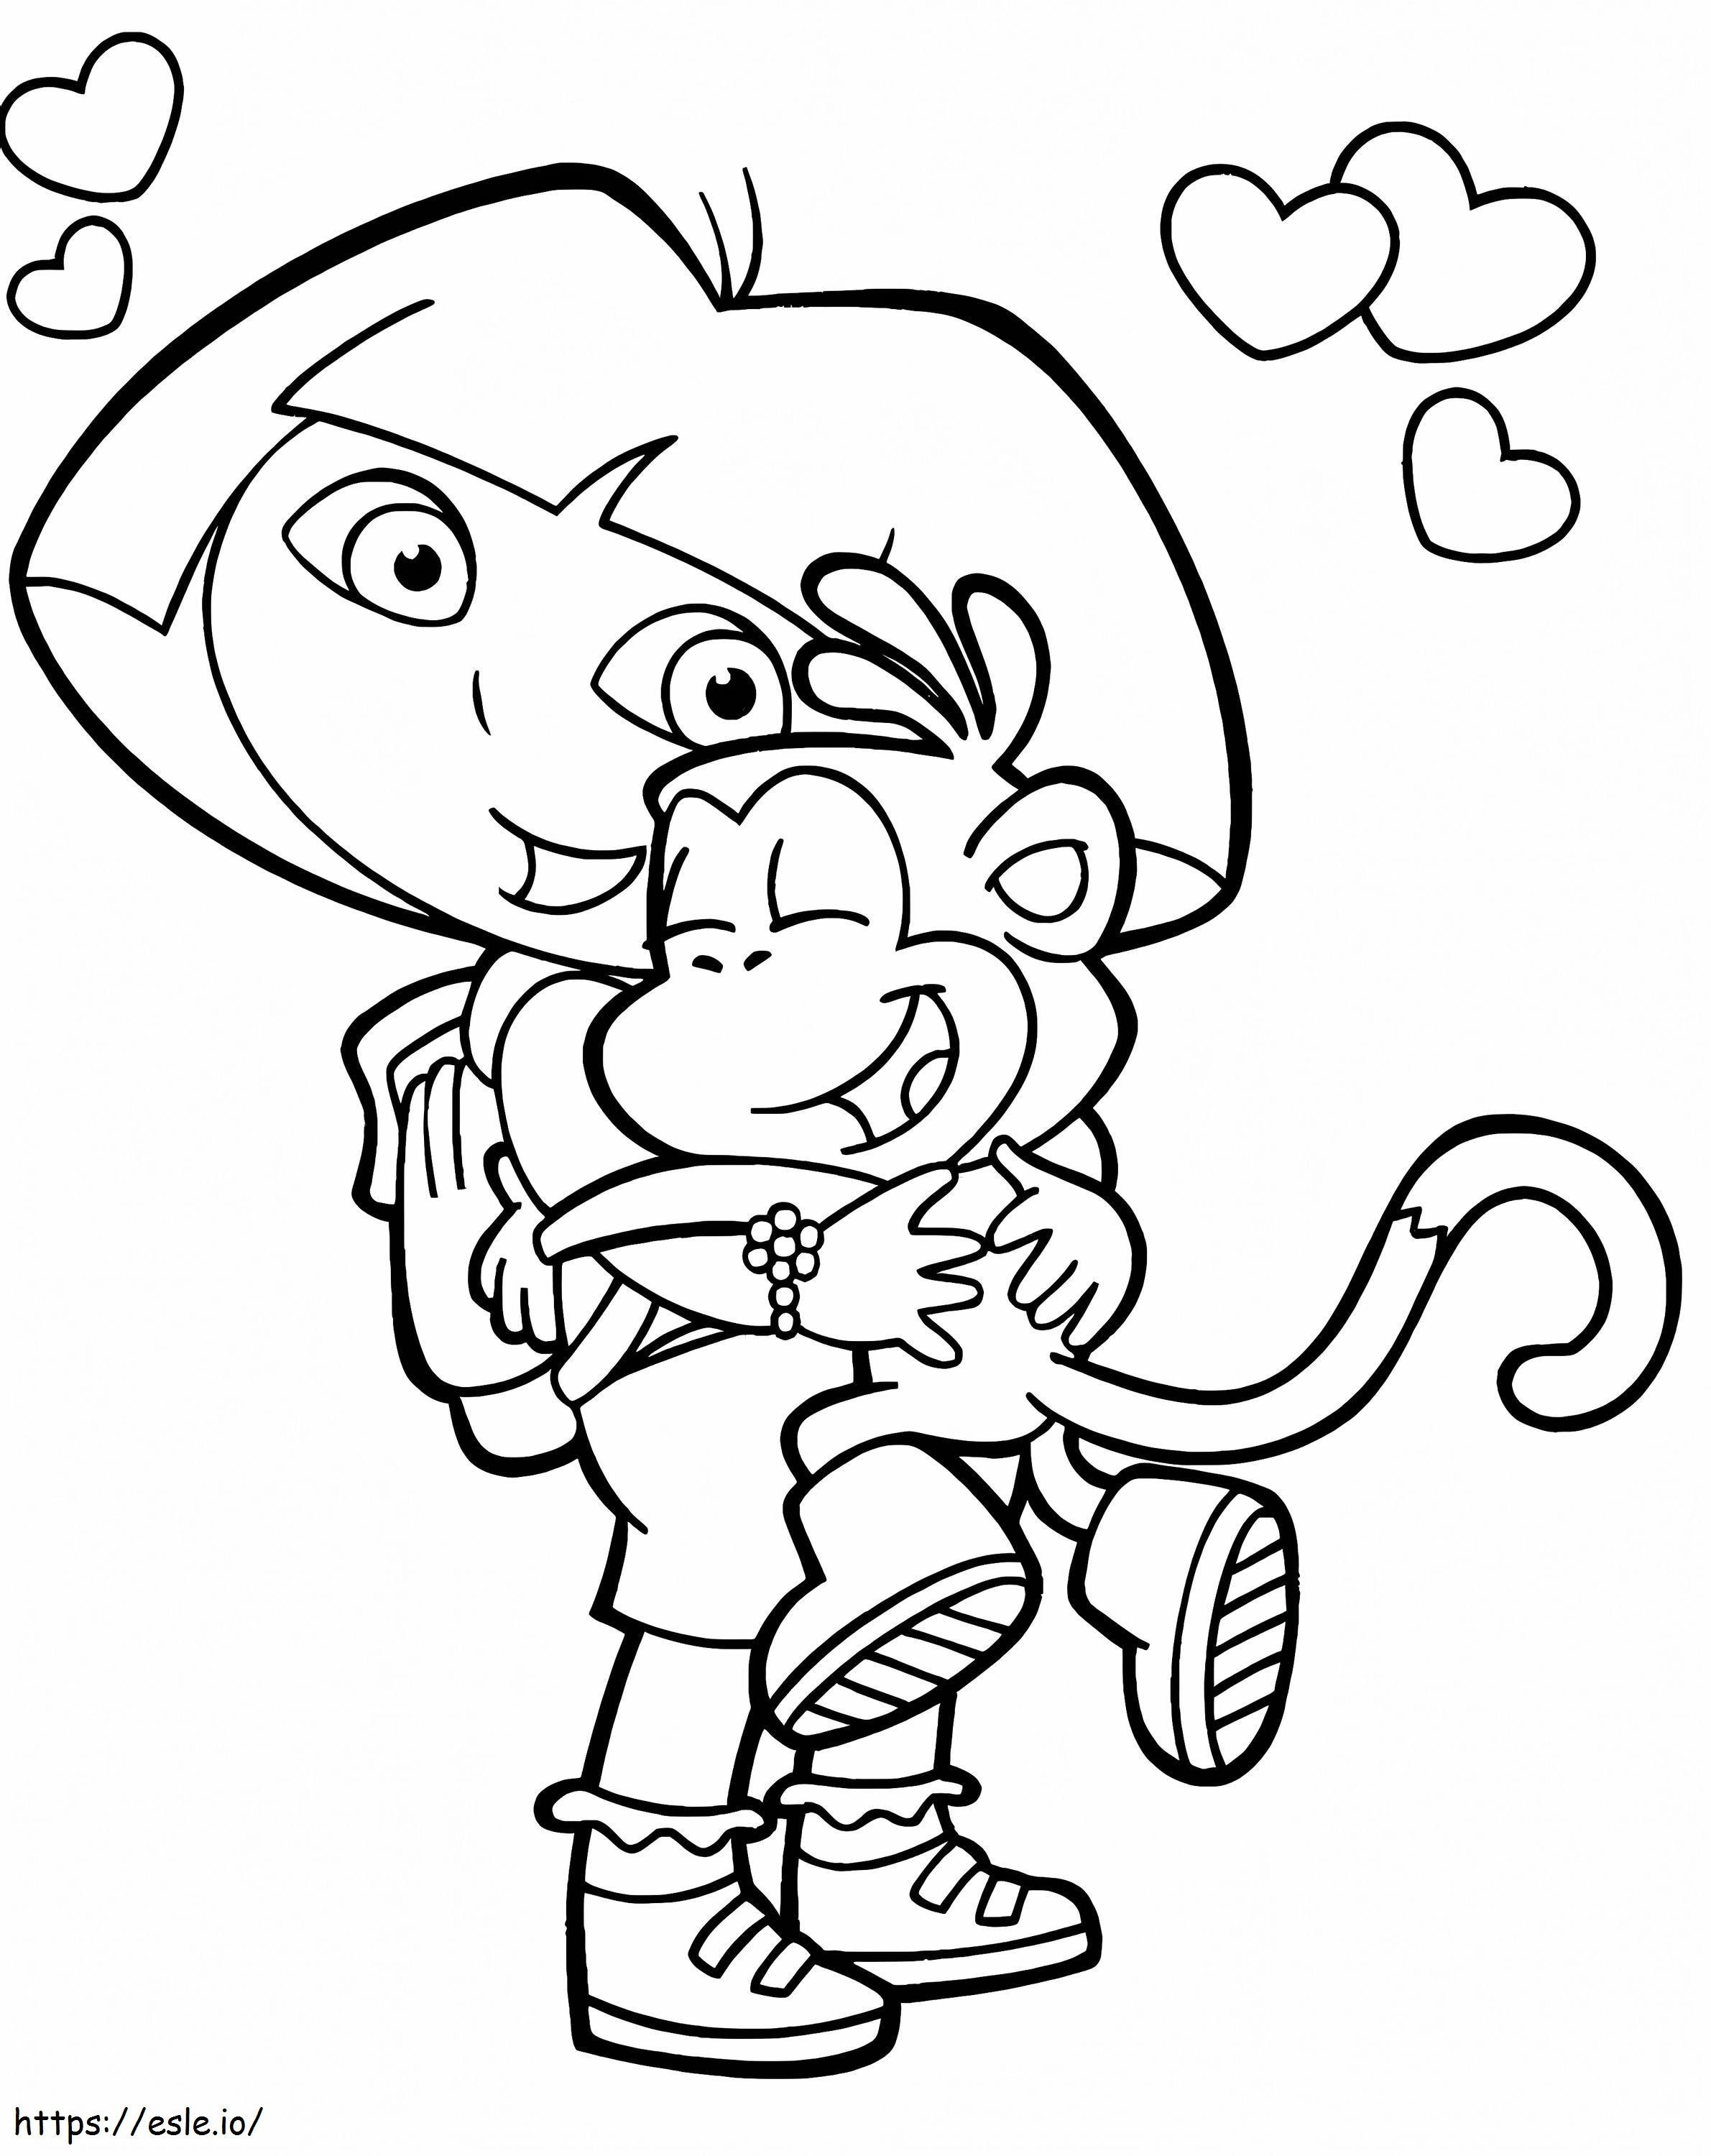 Dora Hugs Boots coloring page